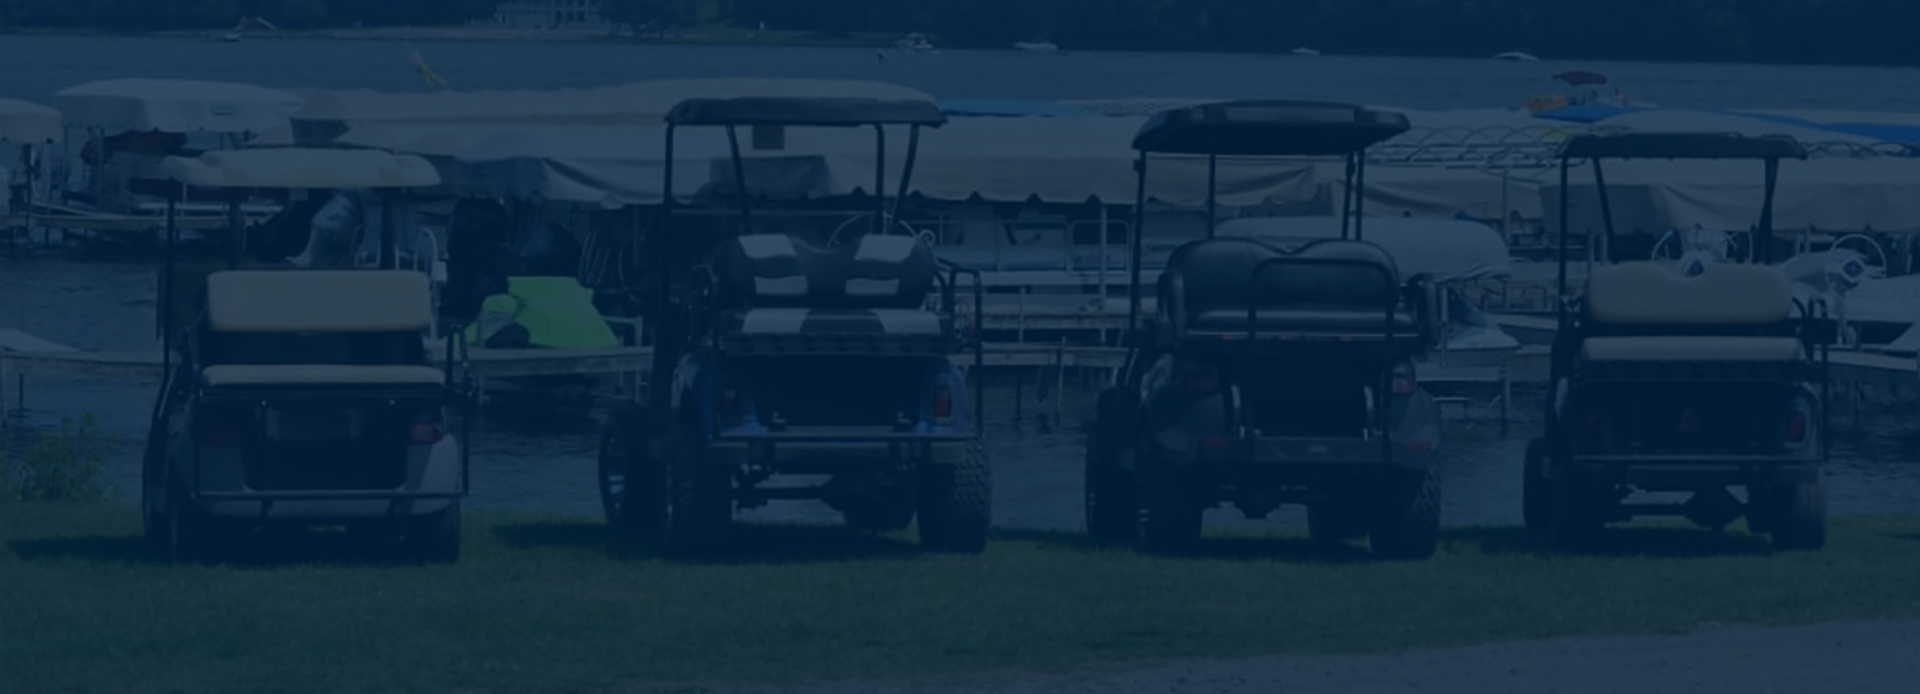 Facts On Lithium-Ion For Golf Cars - Golf Course Industry